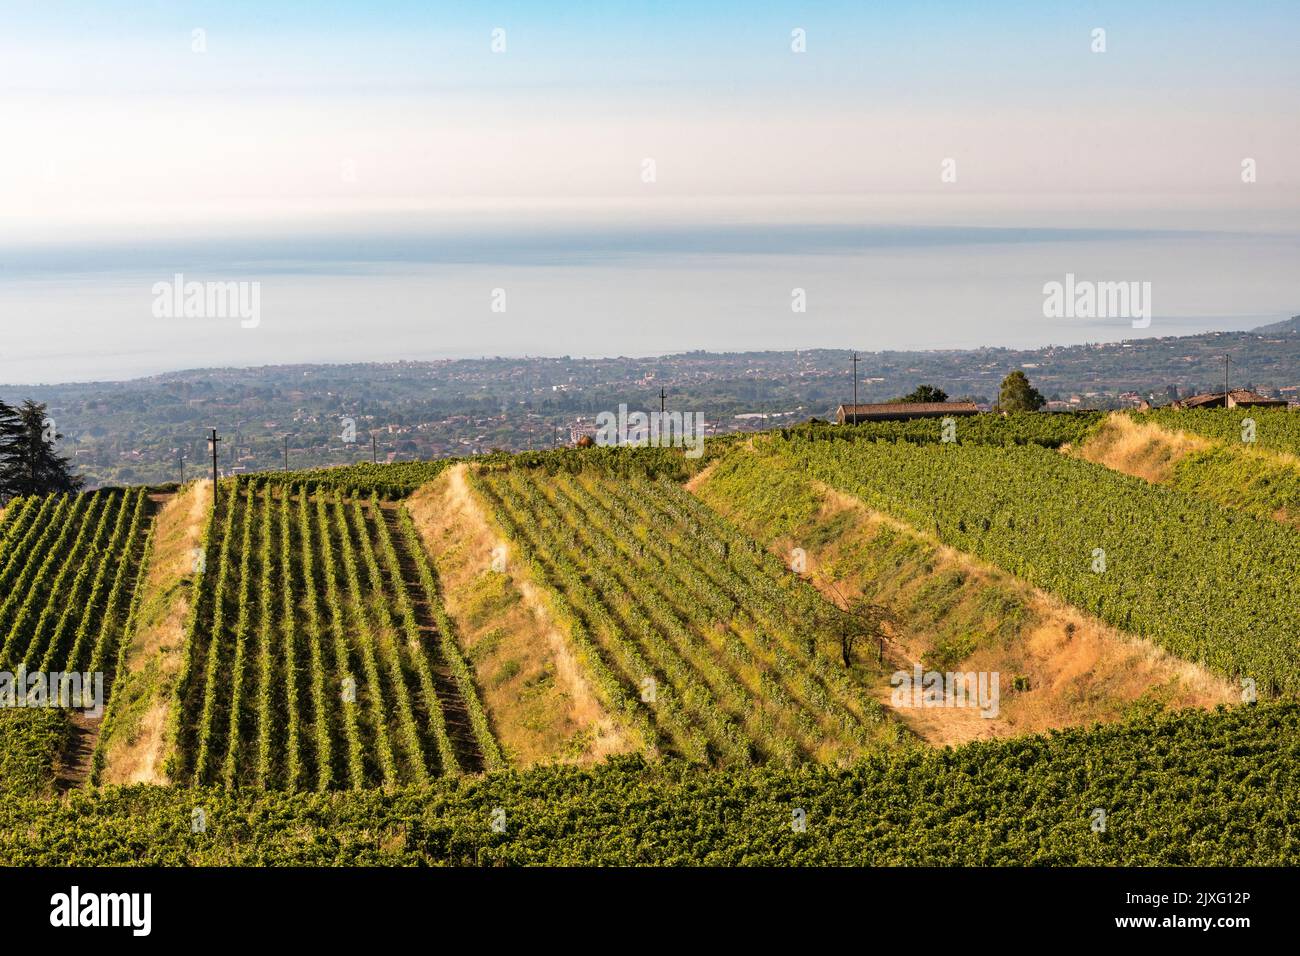 Vineyards at the Barone di Villagrande winery near the village of Milo, high on the slopes of Mount Etna, Sicily, Italy Stock Photo